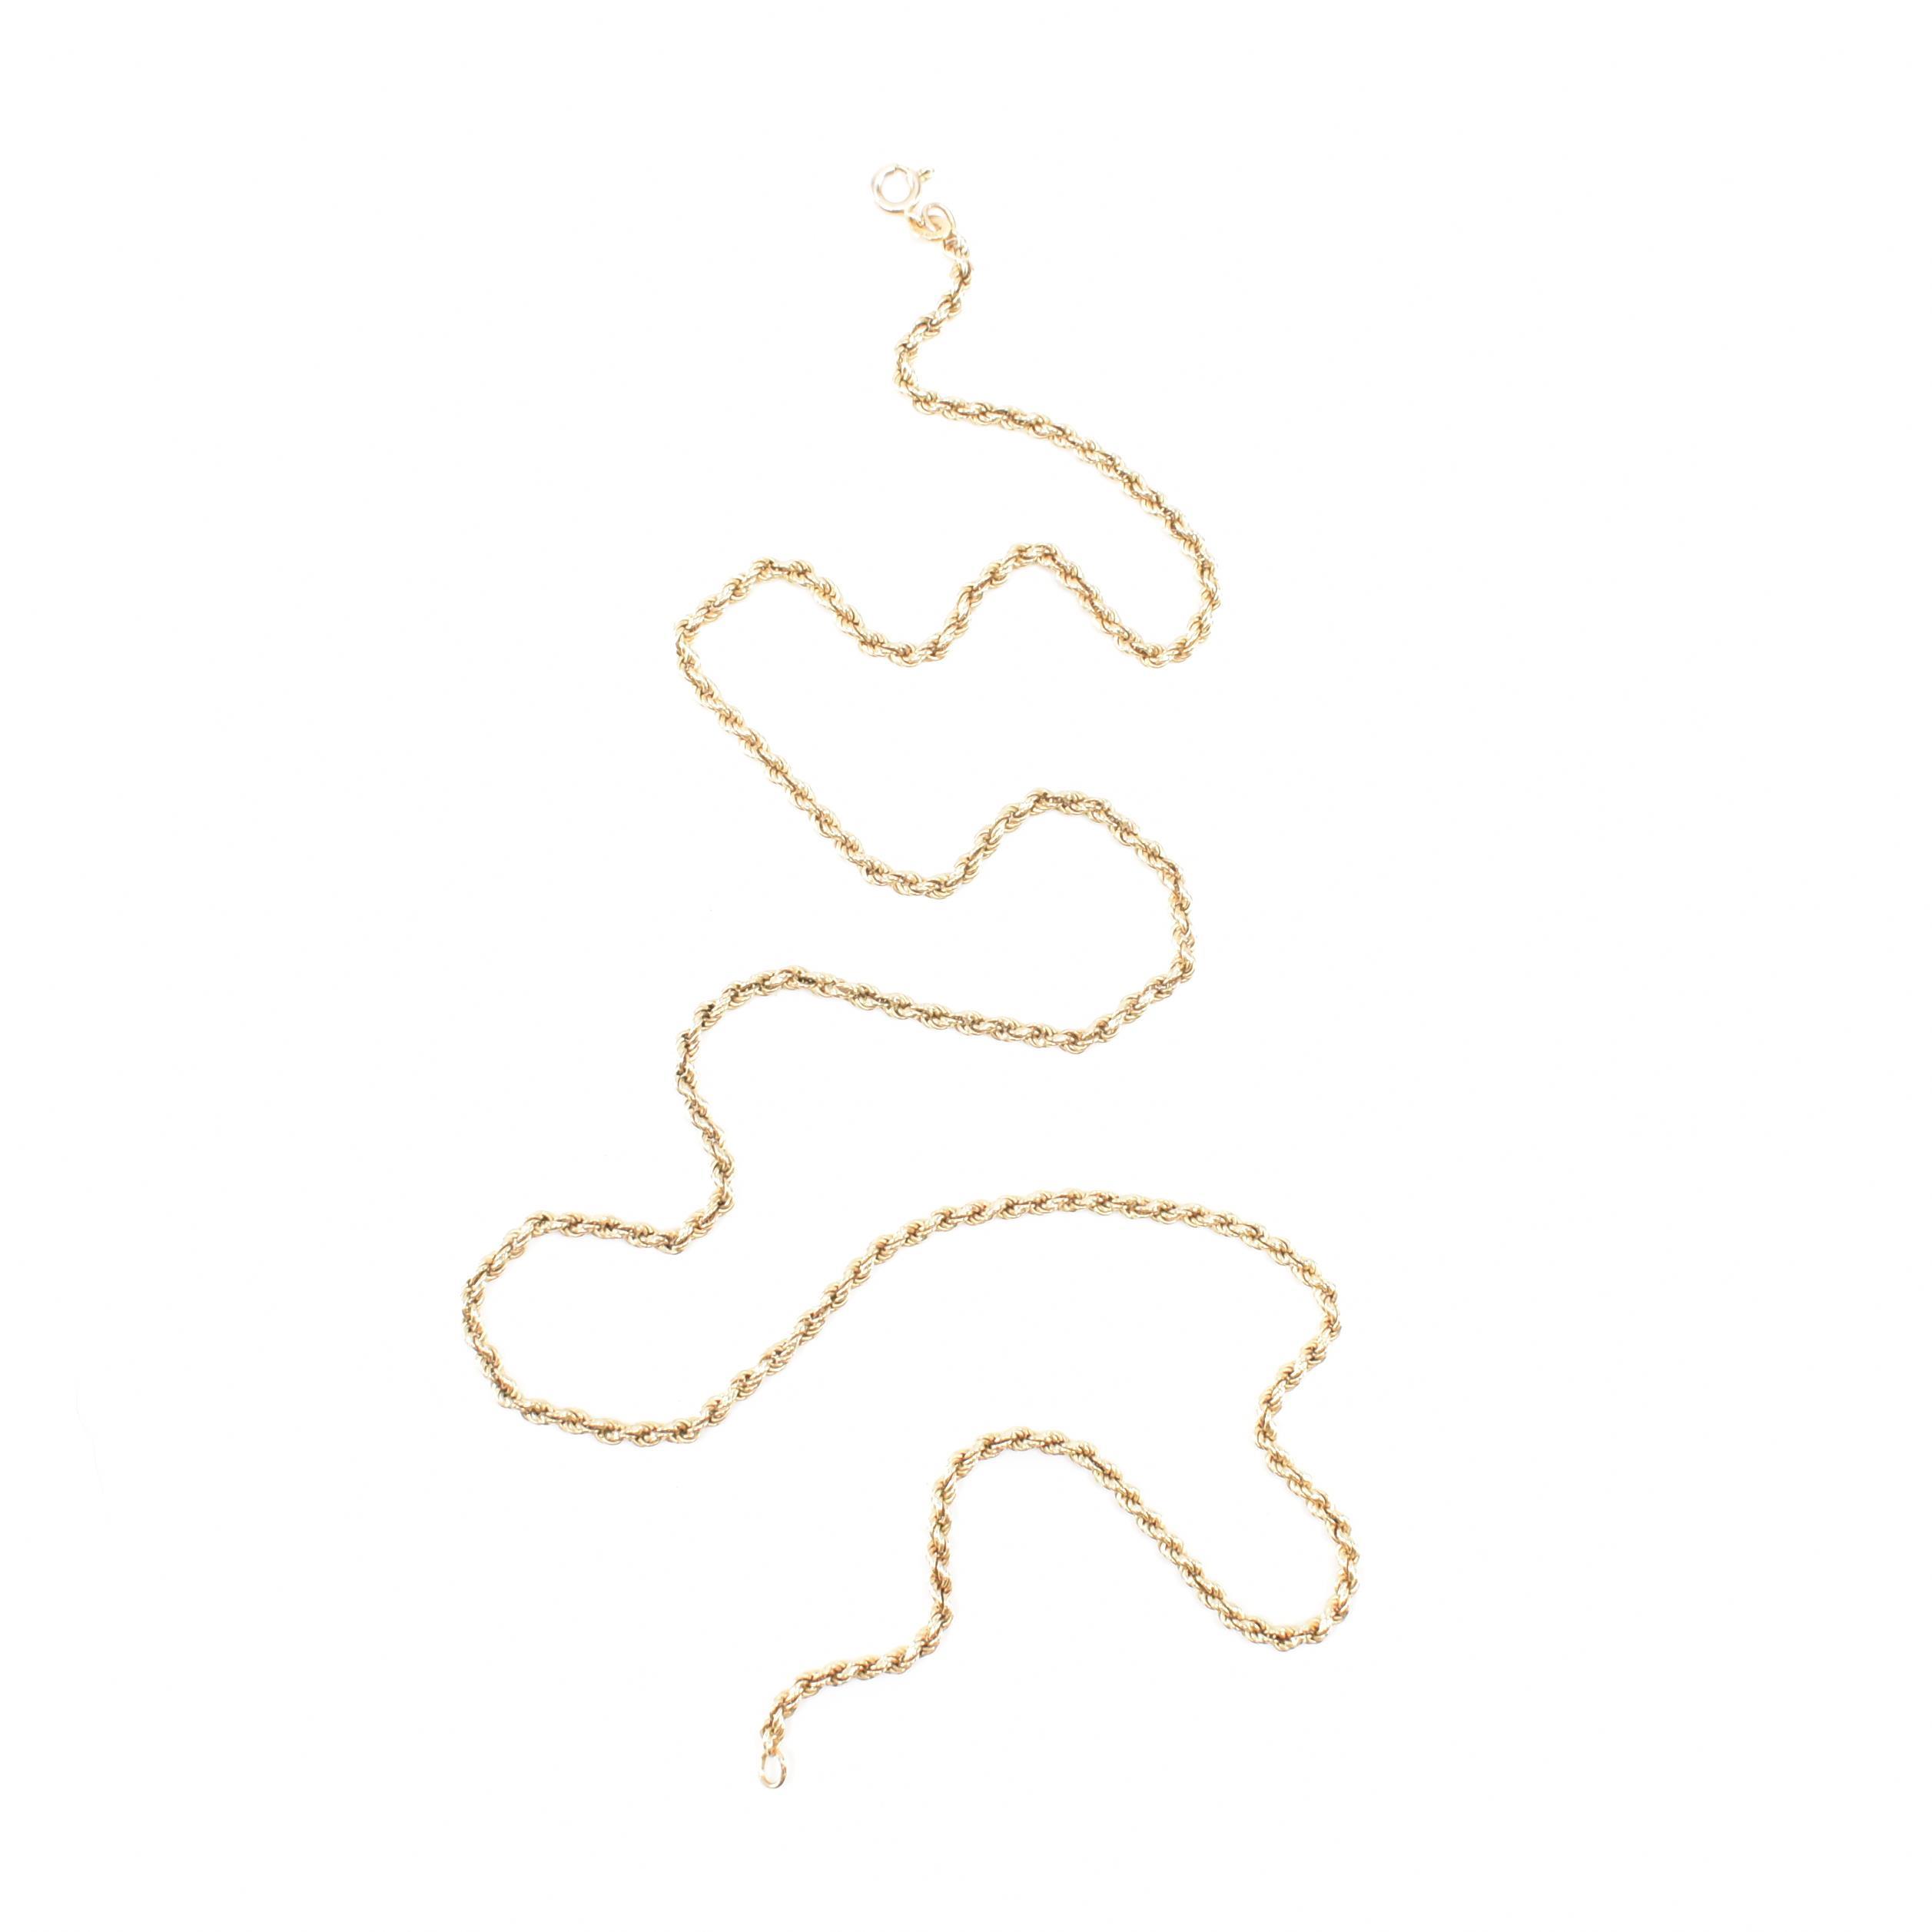 WITHDRAWN - HALLMARKED 9CT GOLD ROPE TWIST CHAIN NECKLACE - Image 2 of 6